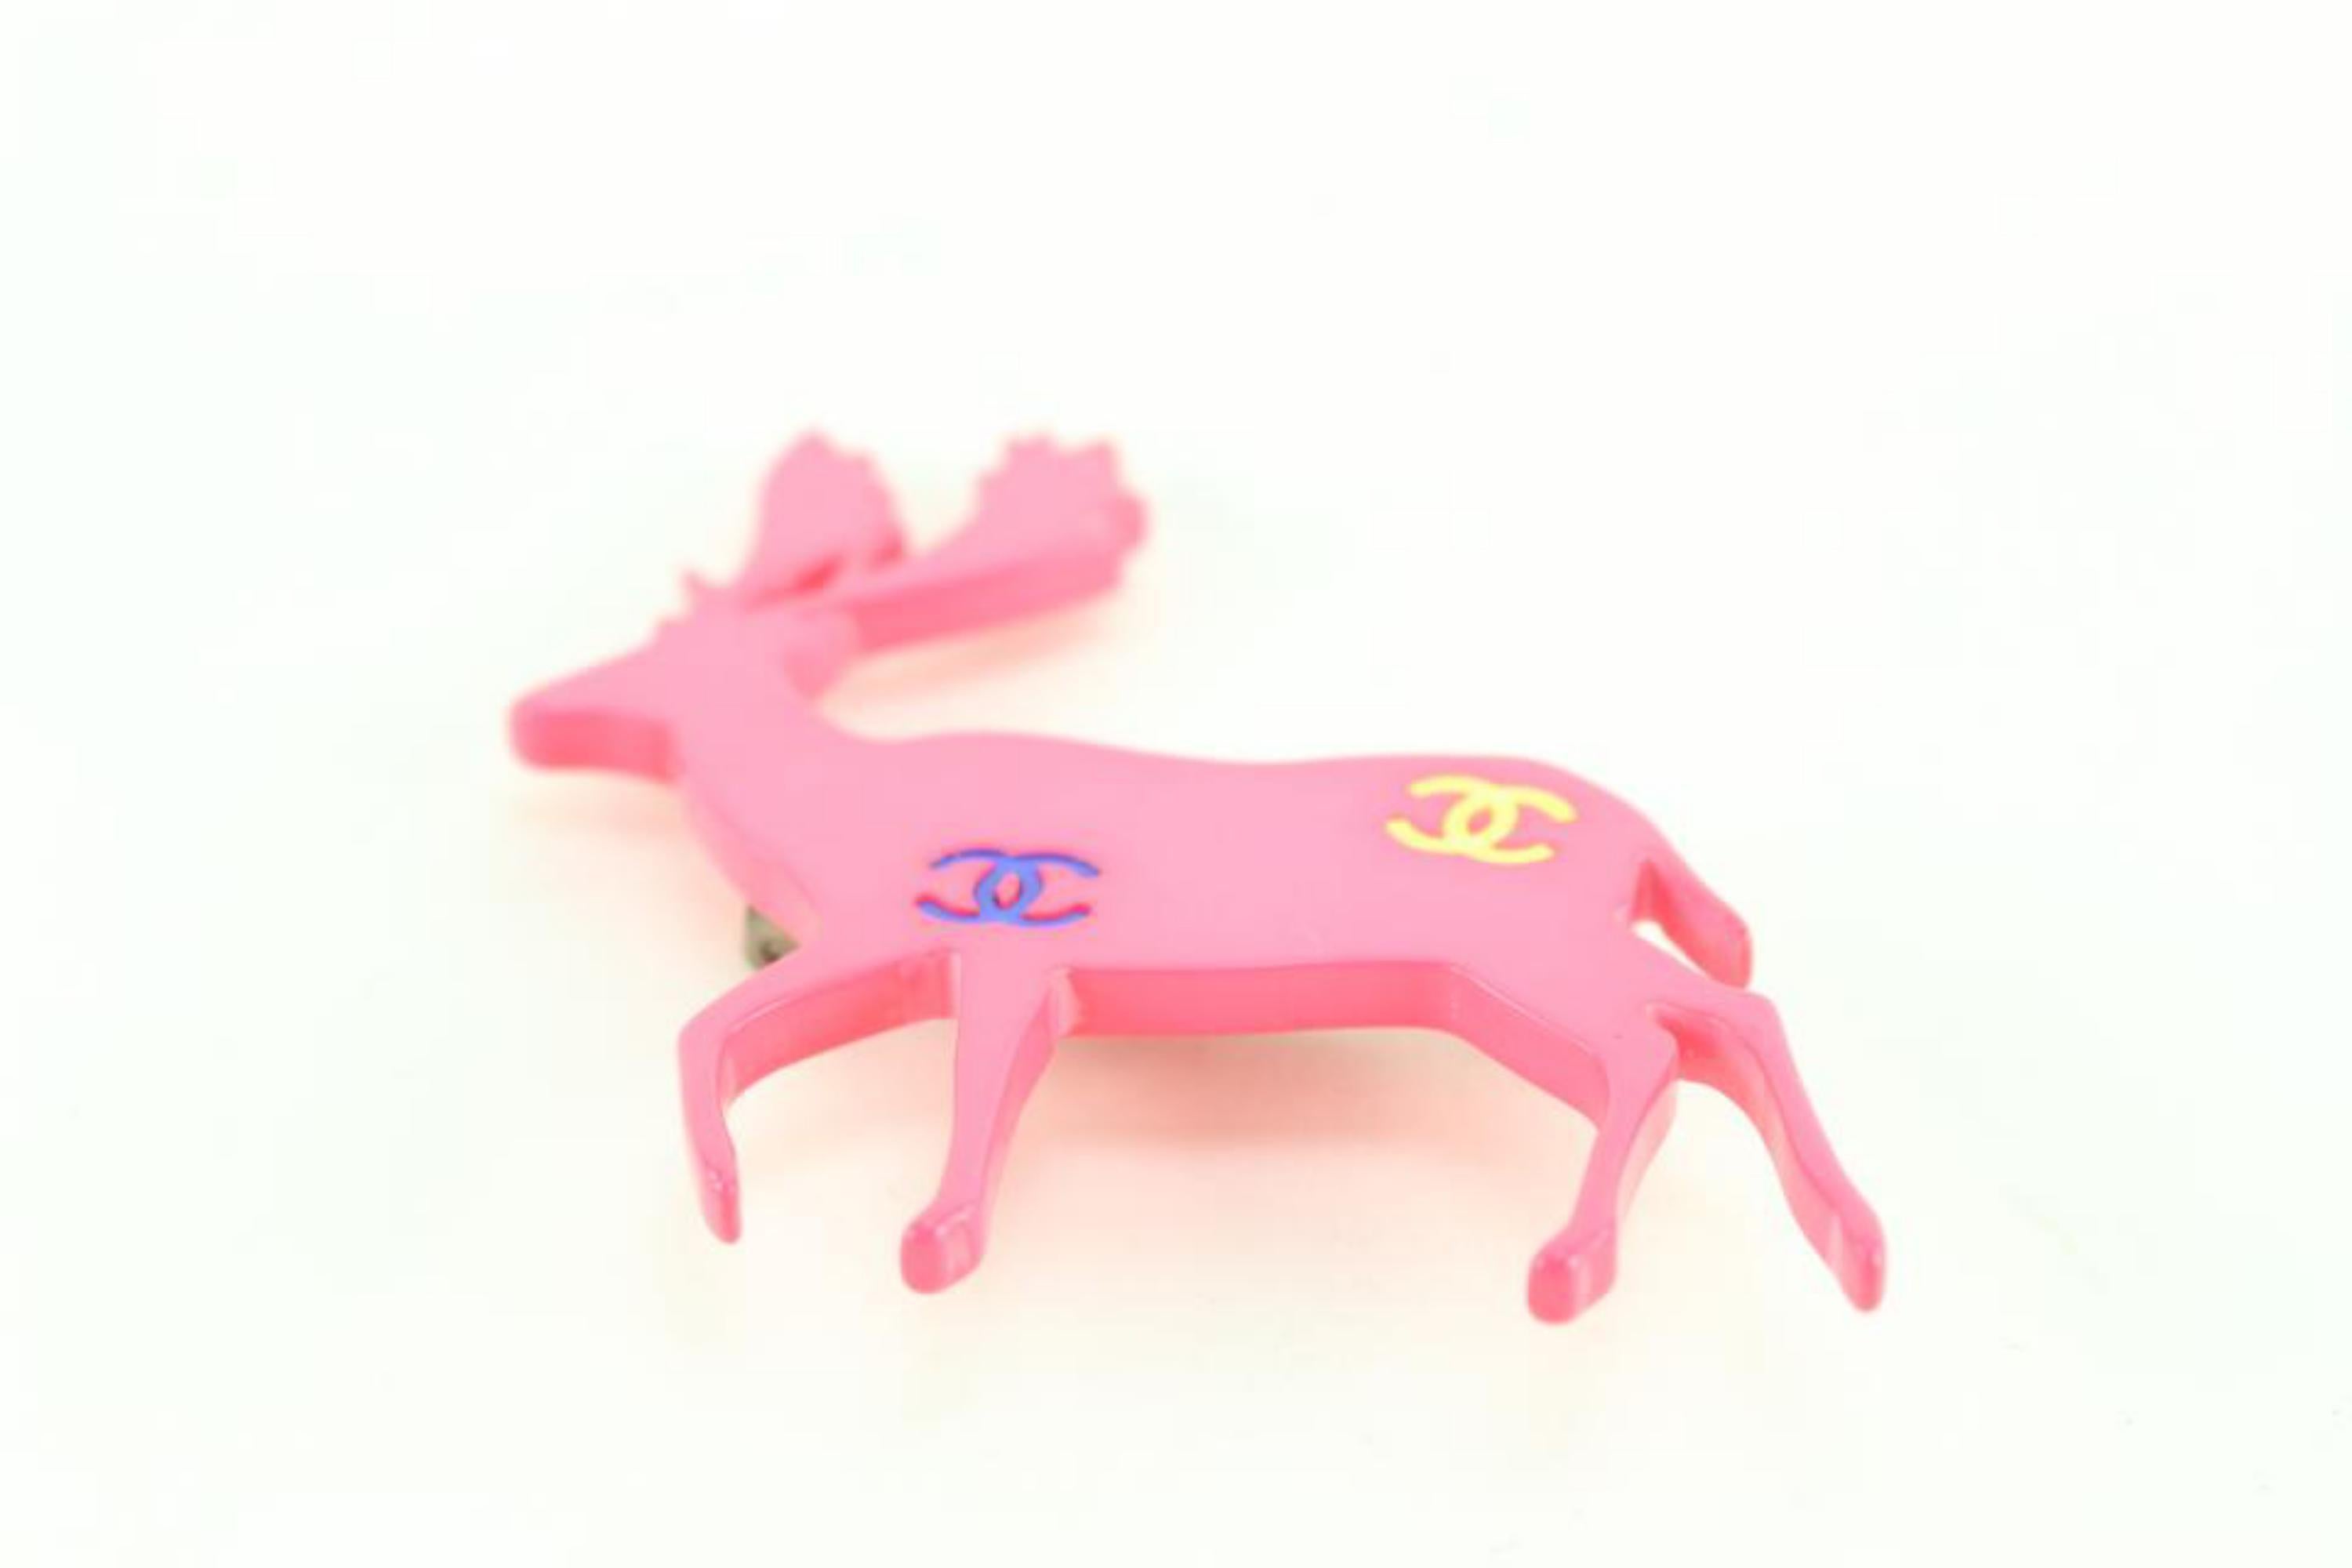 Chanel Pink Christmas Holiday CC Multicolor Reindeer Deer Brooch Pin 21cz76s For Sale 2